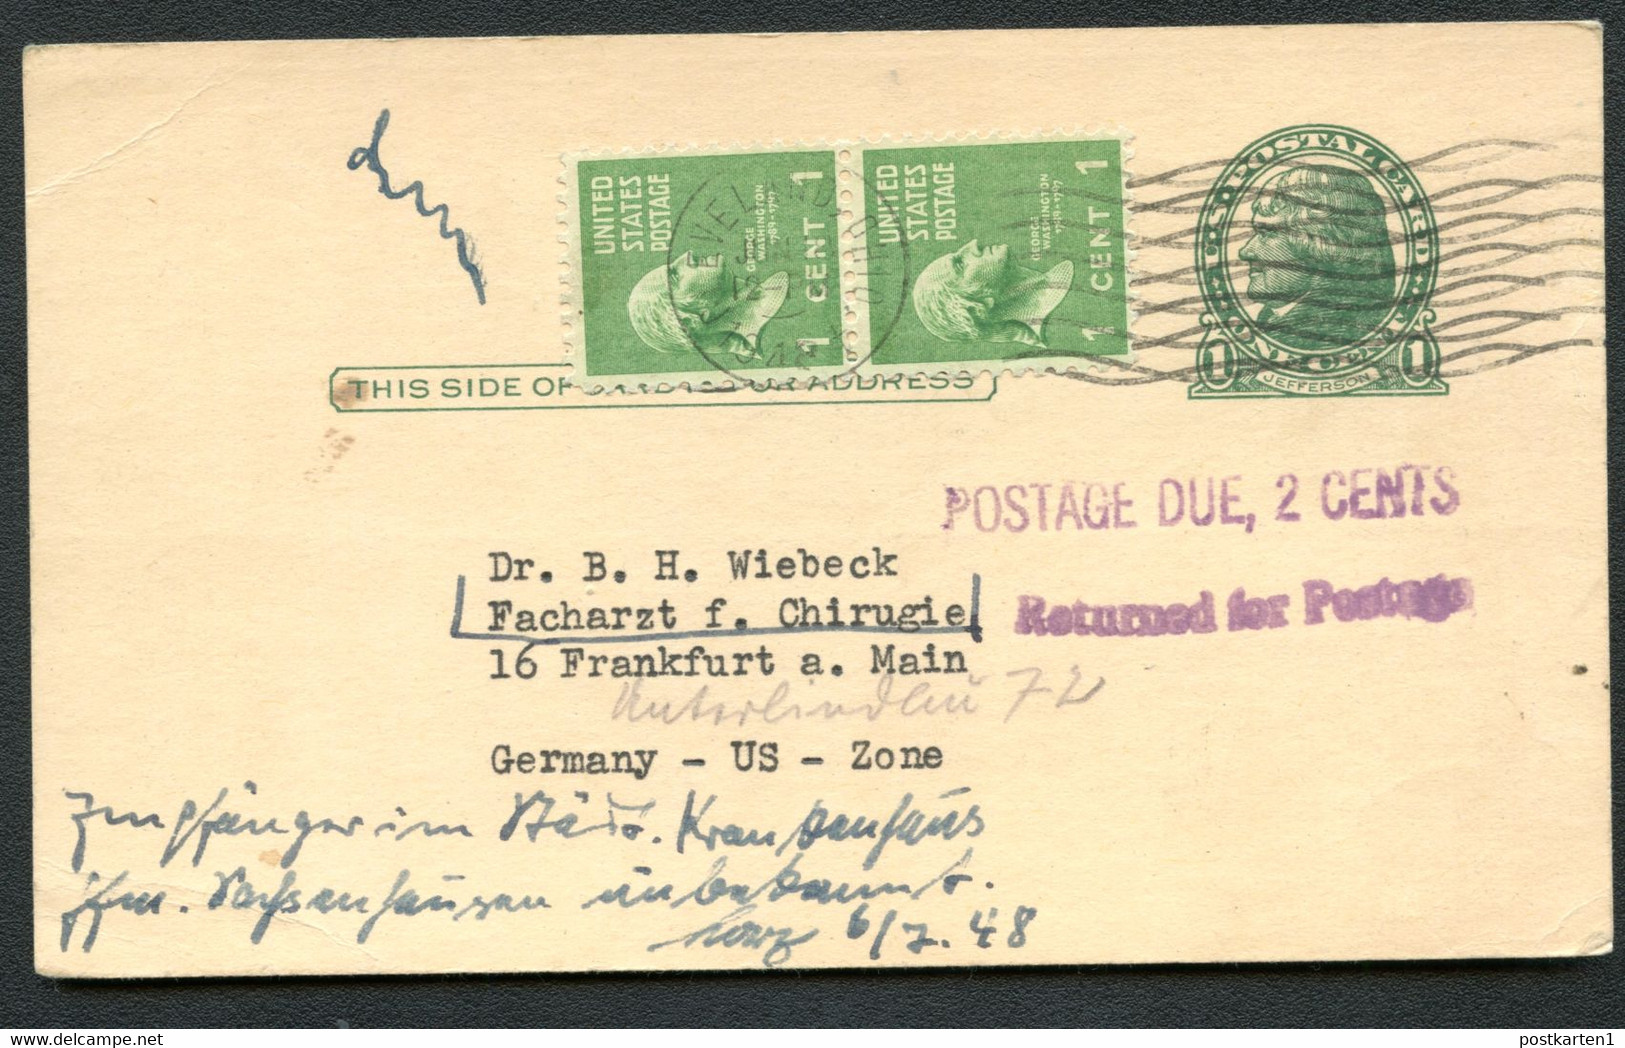 UX27 UPSS UX27e Postal Card Cleveland OH To Germany 1948 RETURNED FOR POSTAGE - 1921-40